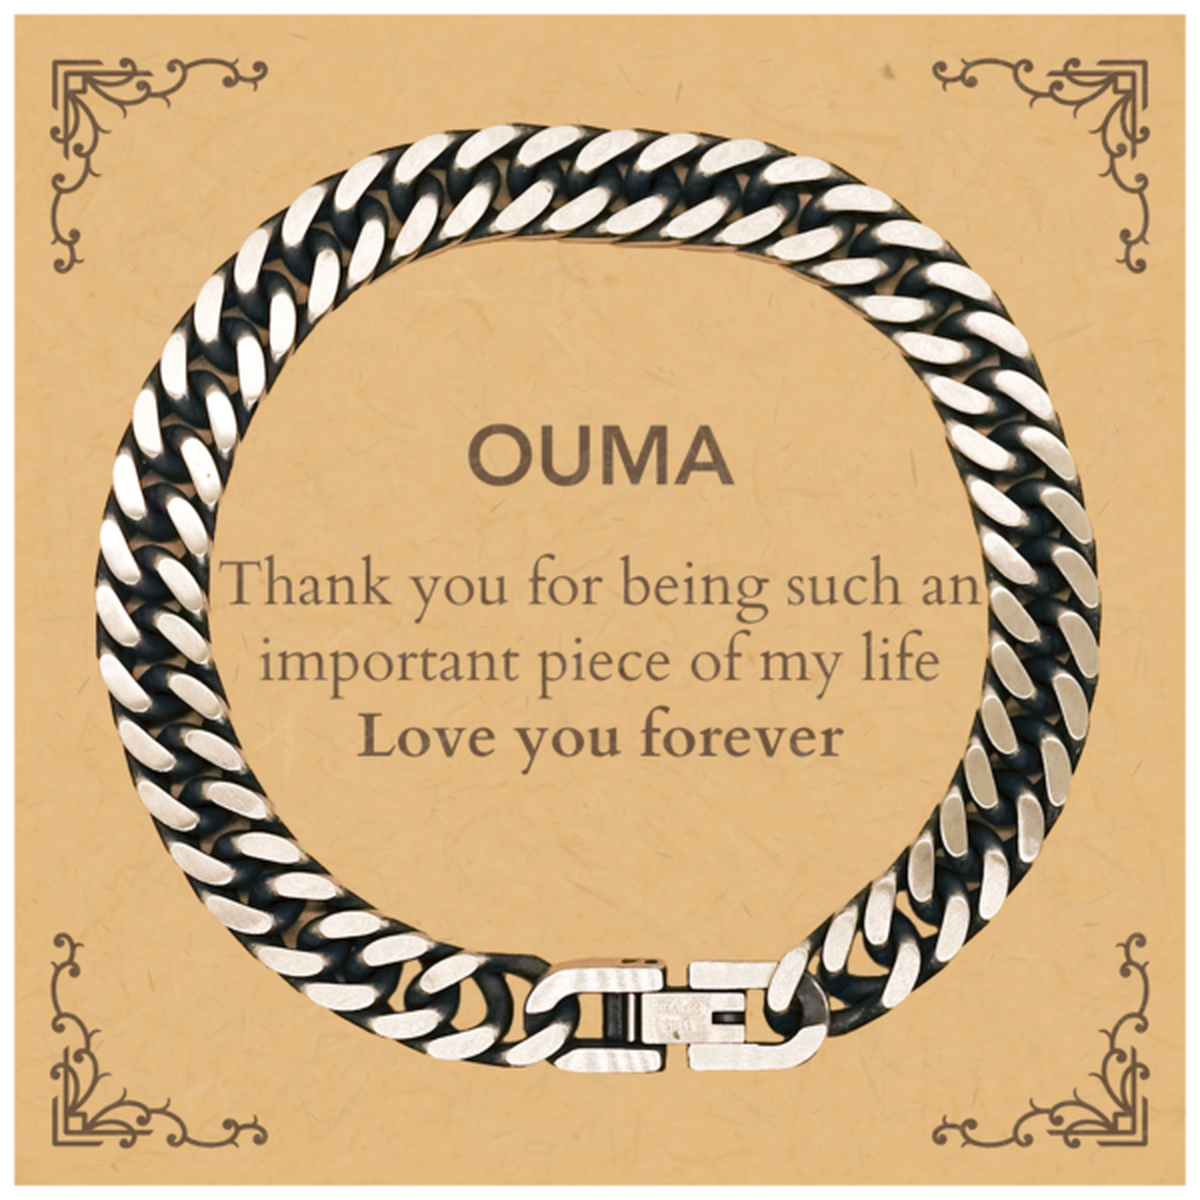 Appropriate Ouma Cuban Link Chain Bracelet Epic Birthday Gifts for Ouma Thank you for being such an important piece of my life Ouma Christmas Mothers Fathers Day